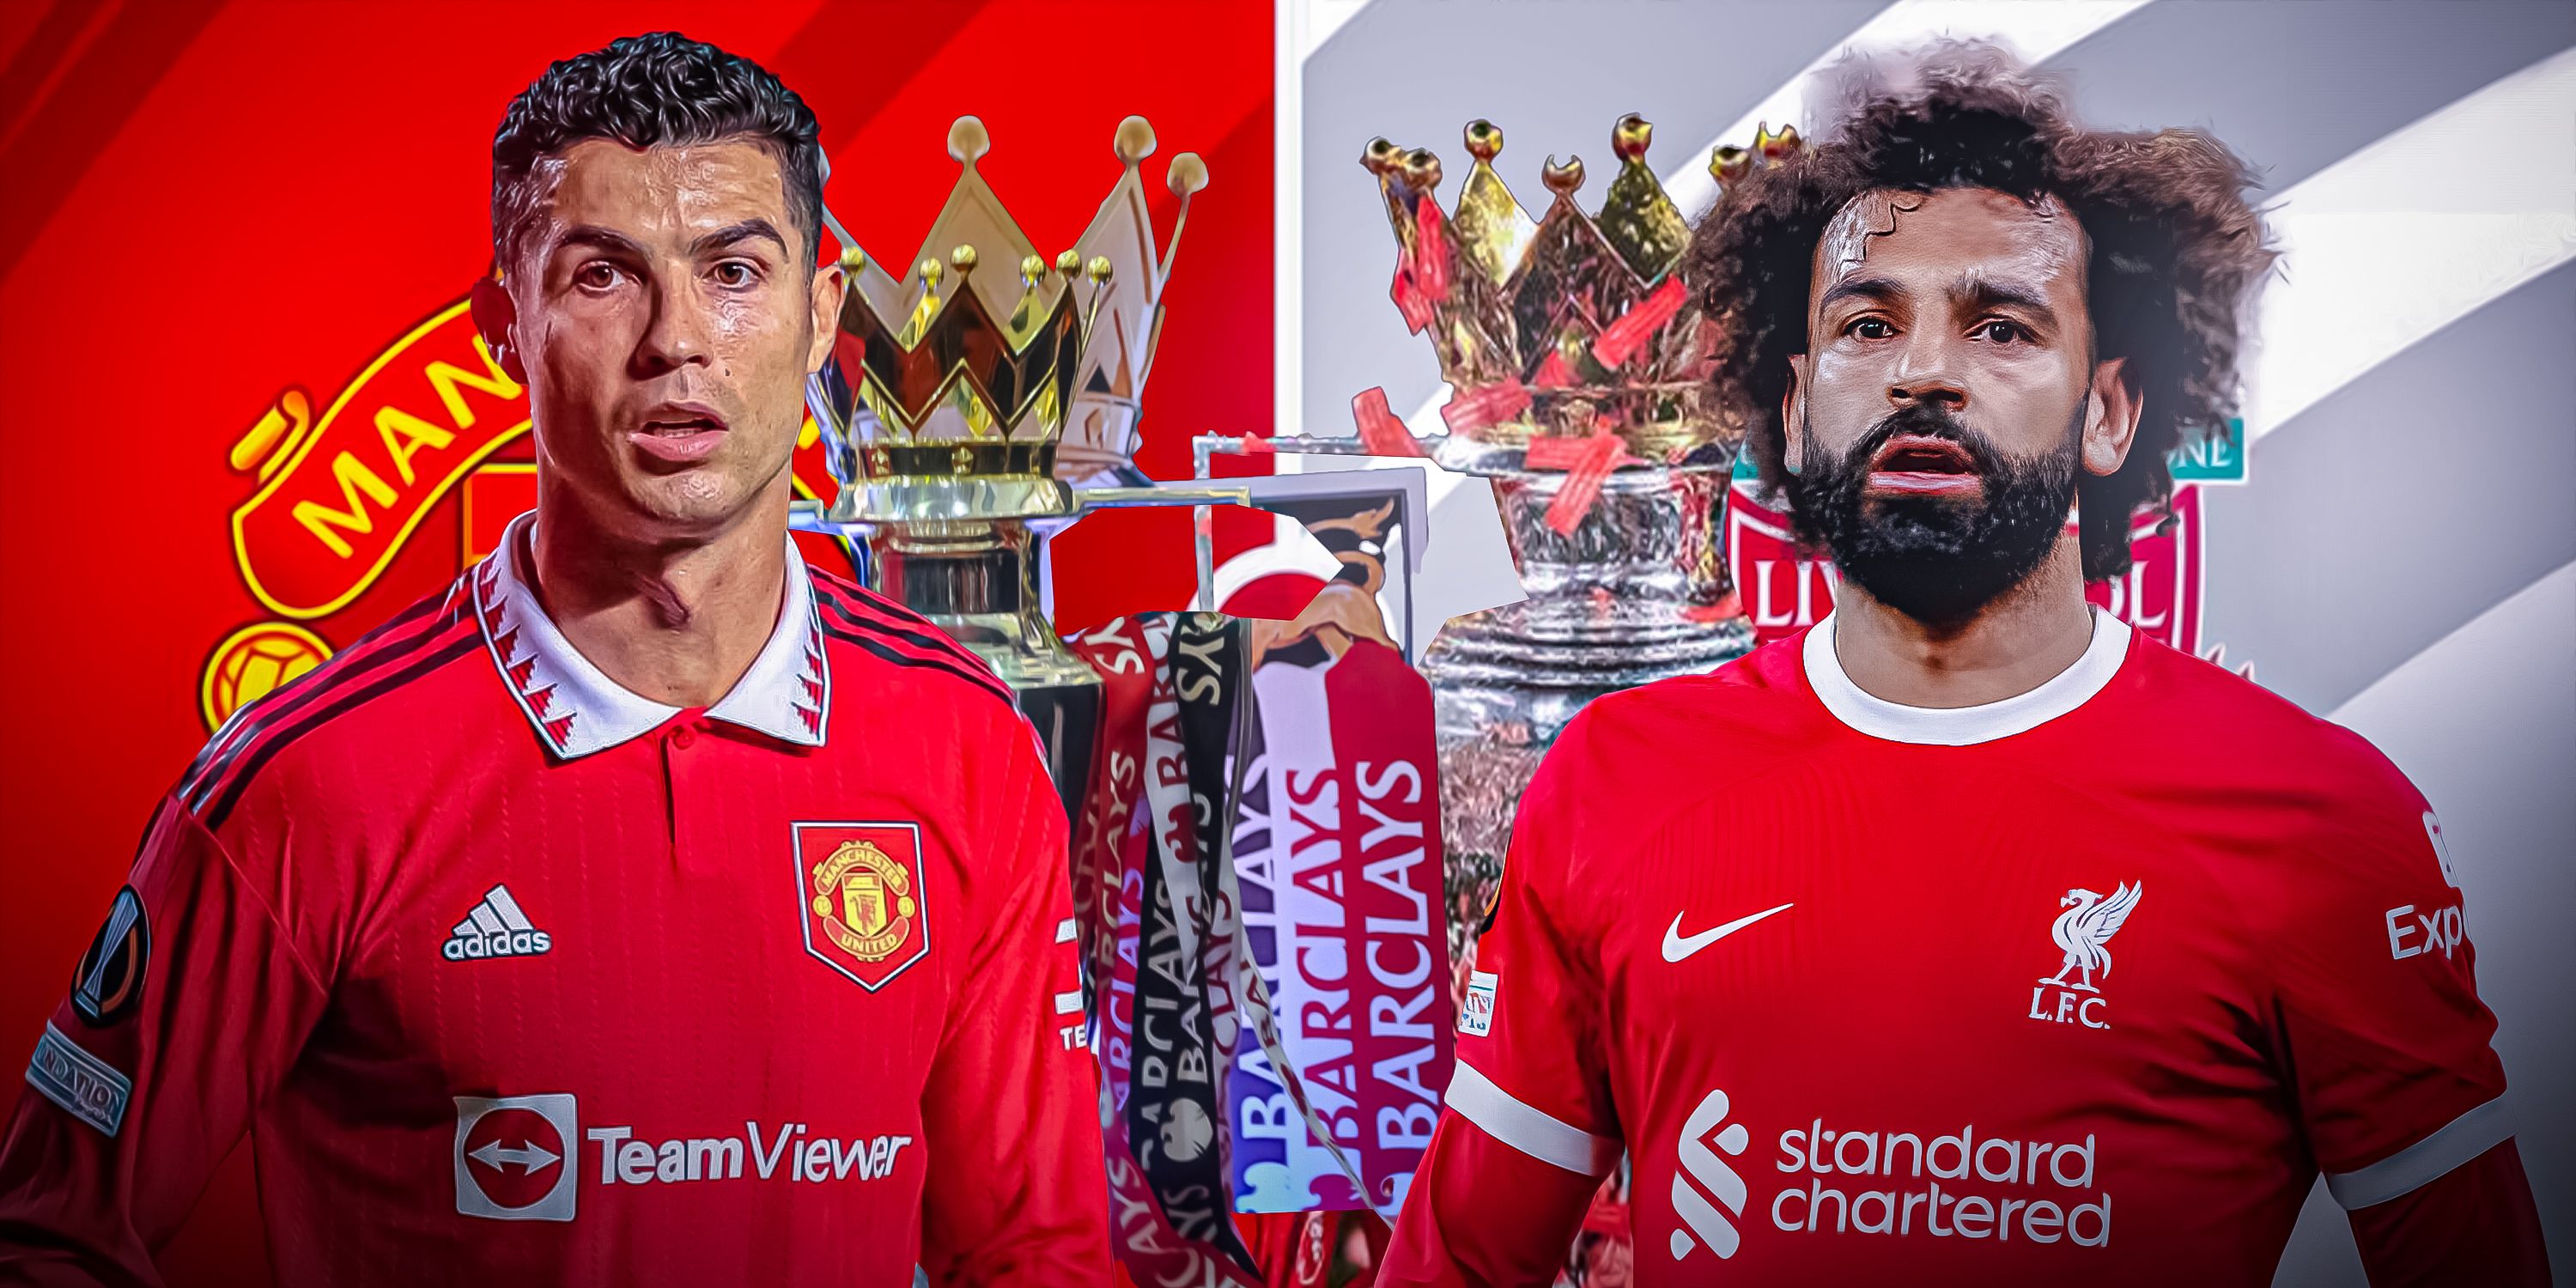 Manchester United's Cristiano Ronaldo and Liverpool's Mohamed Salah.